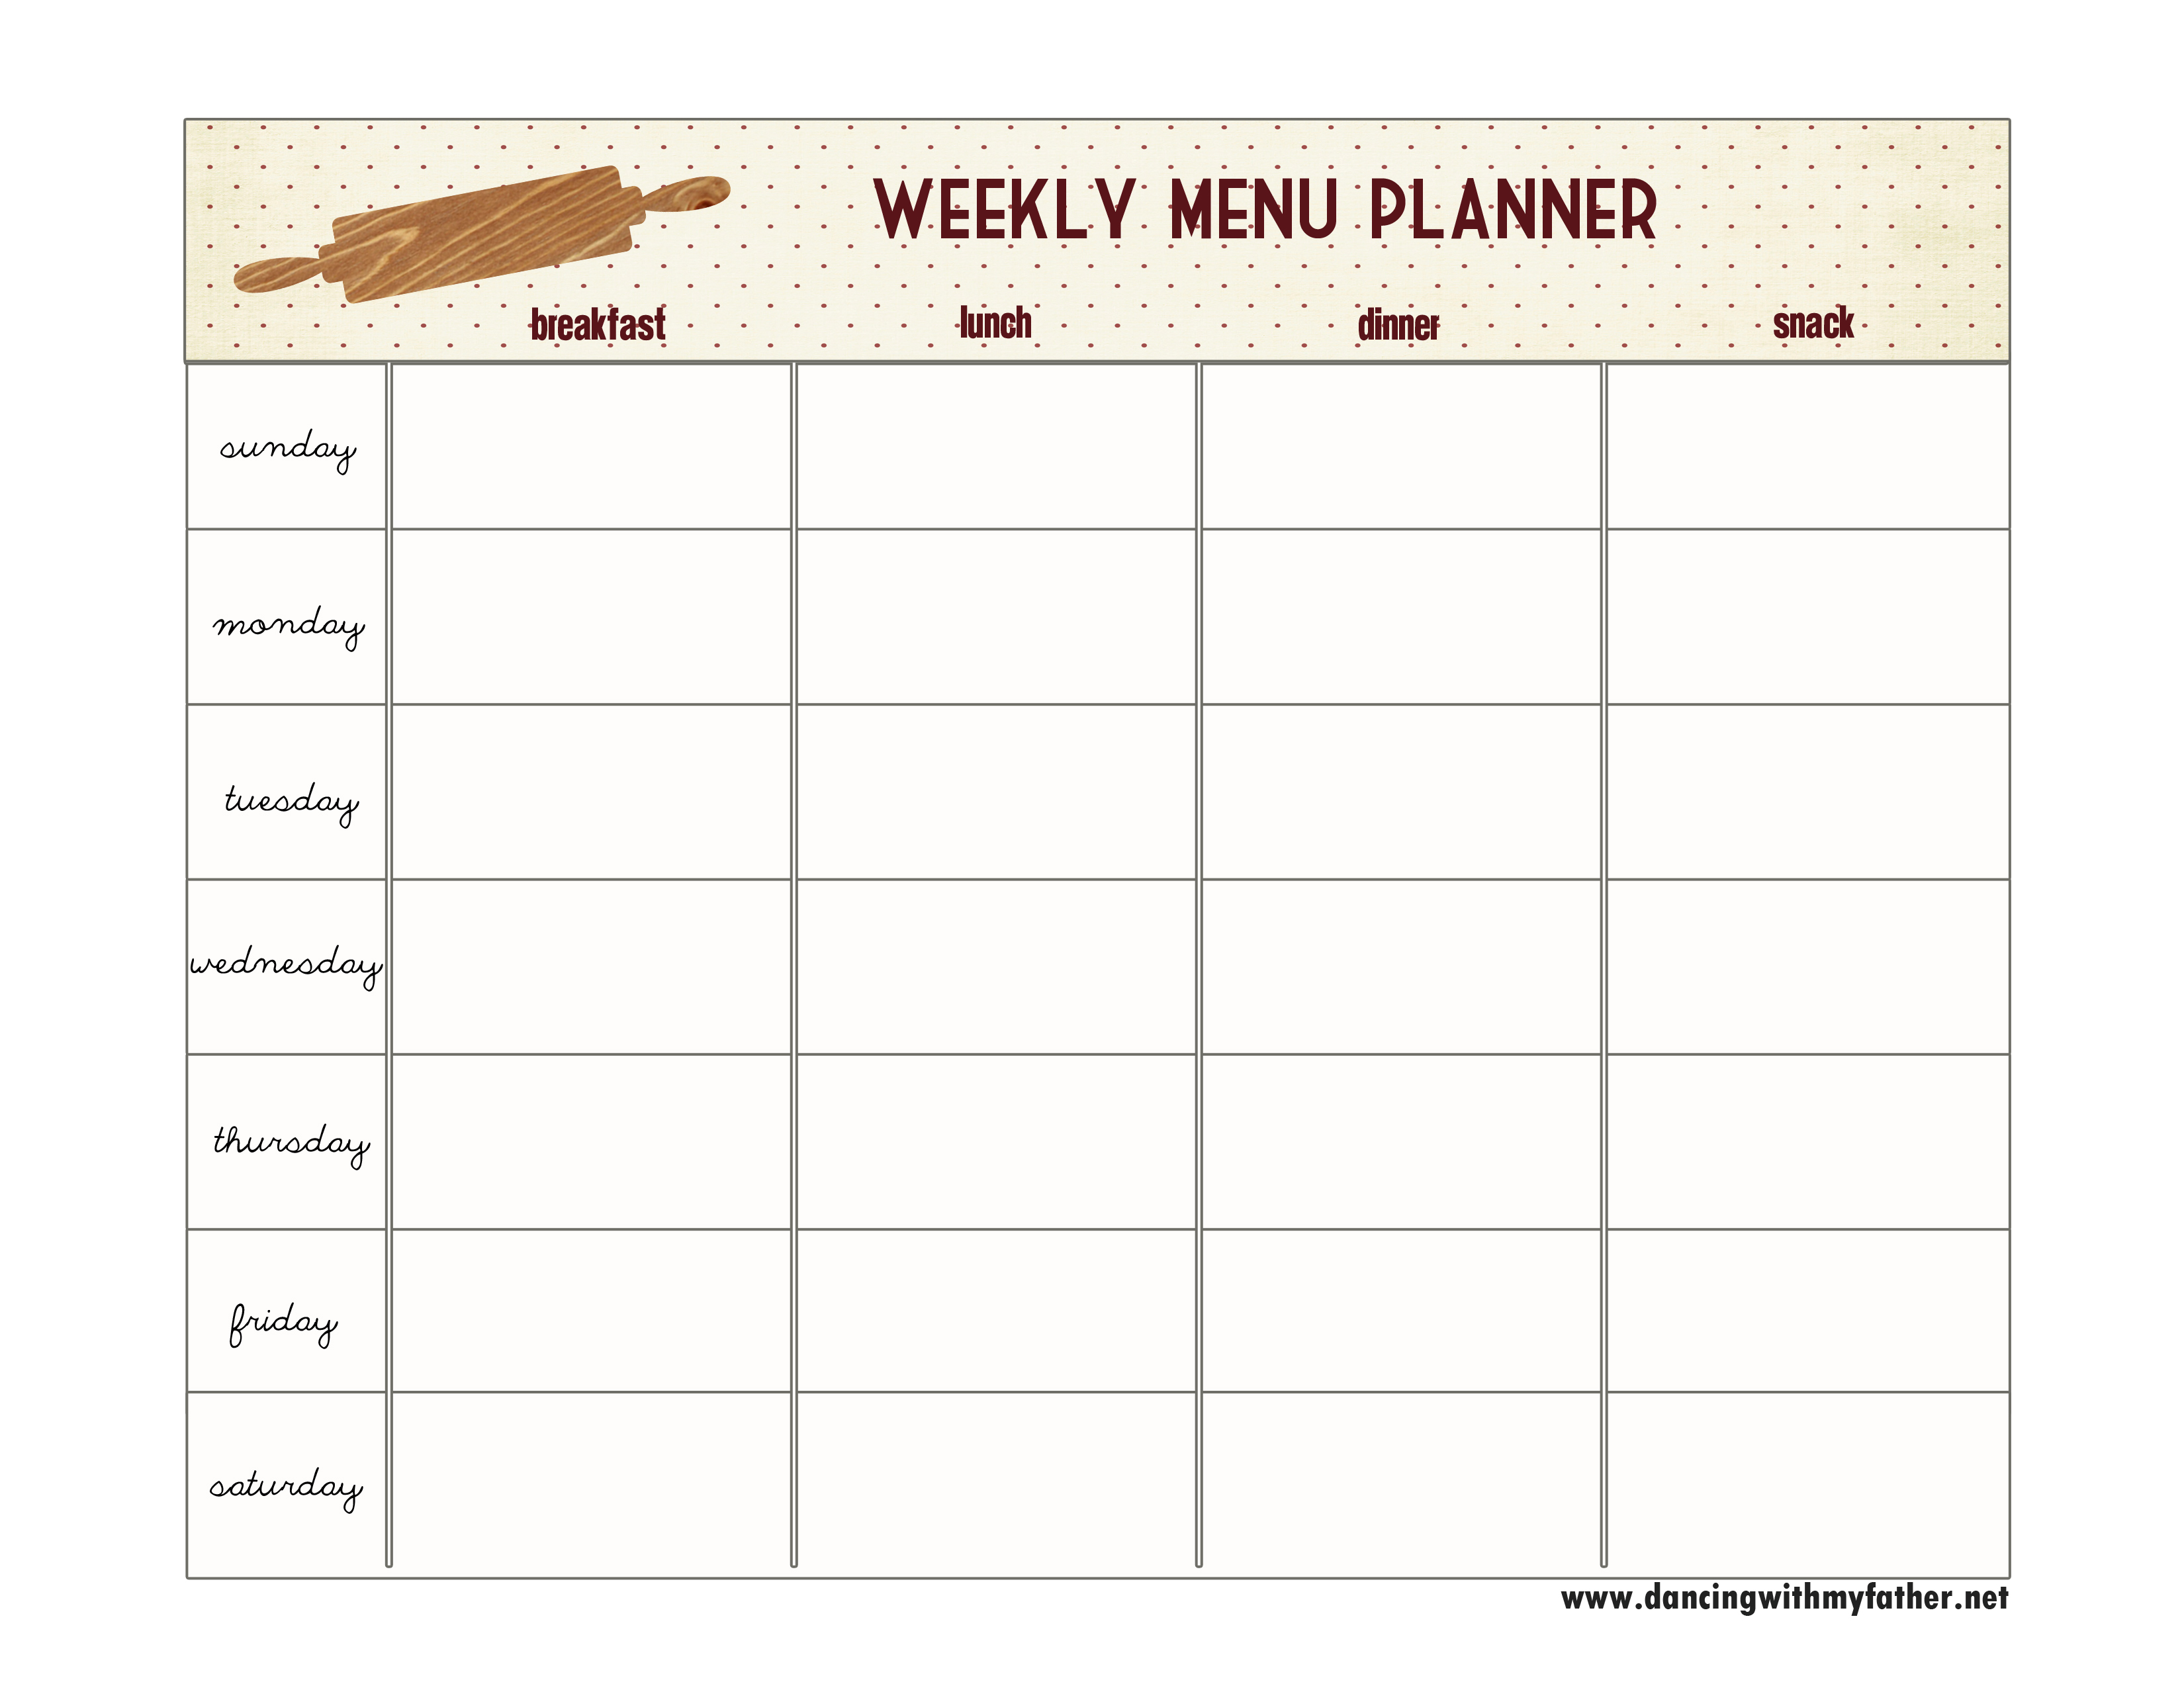 planner-printable-images-gallery-category-page-7-printablee